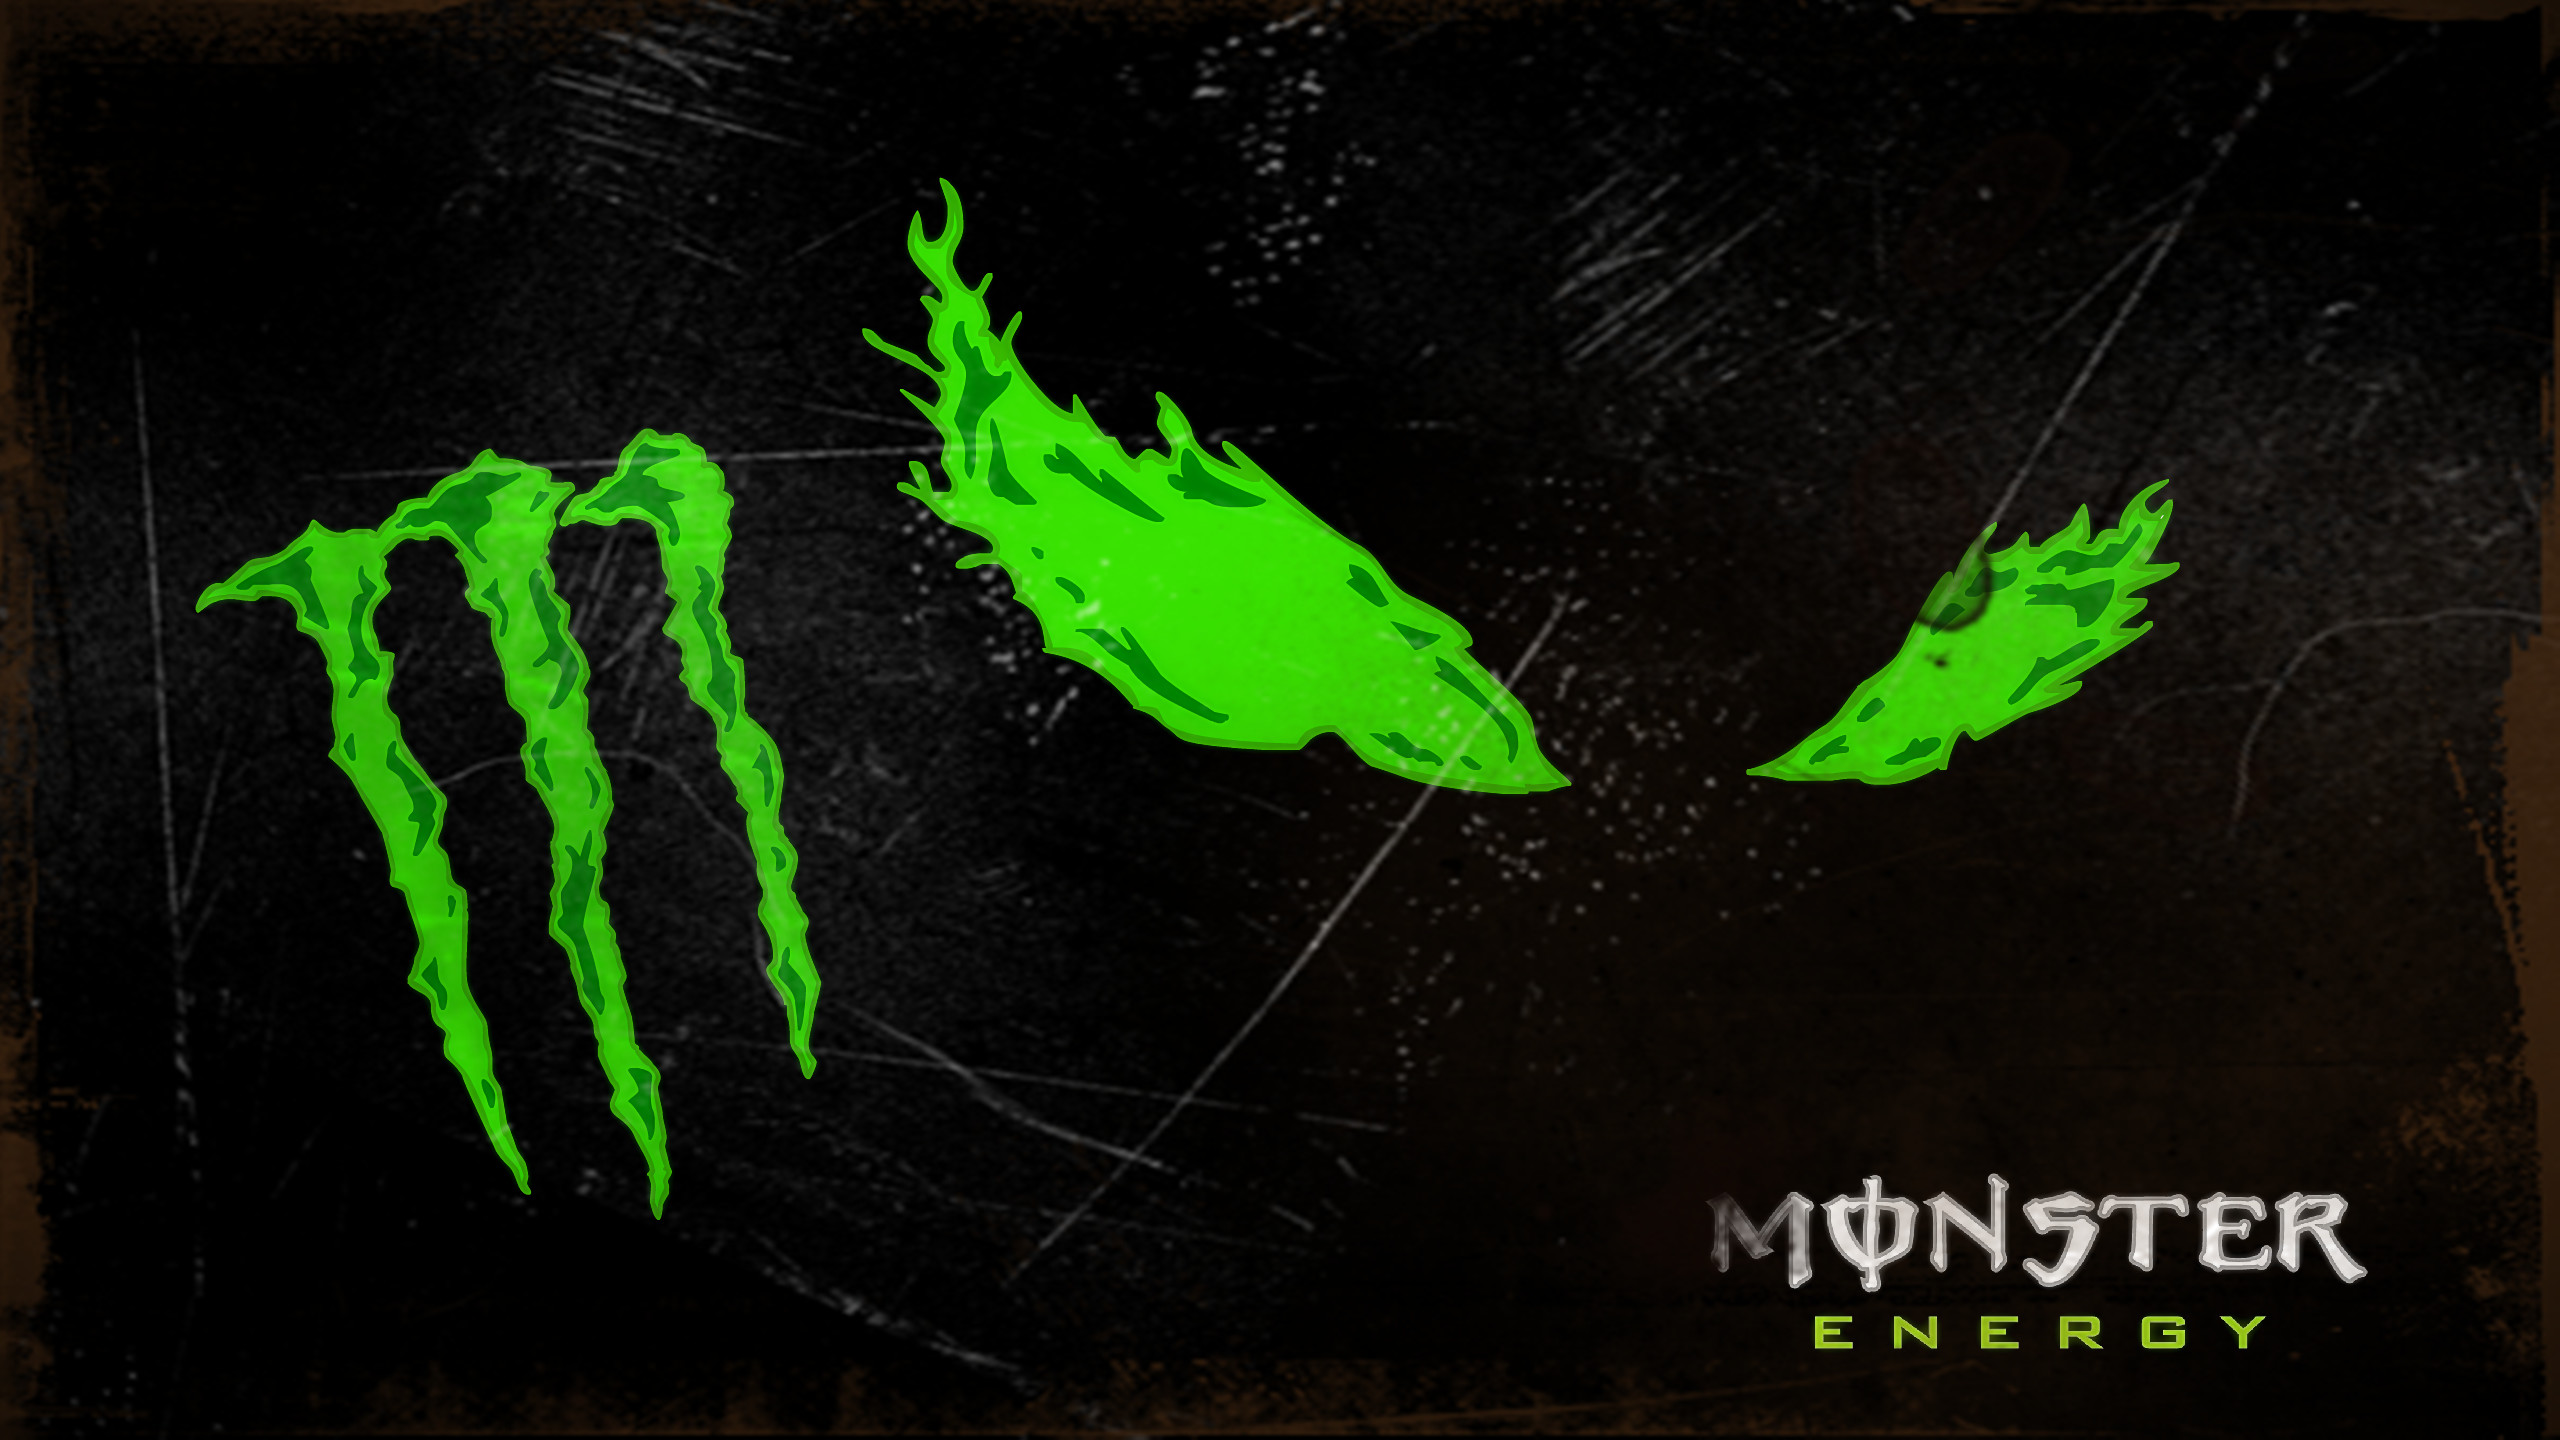 2560x1440 Incoming search terms: new monster wallpaper